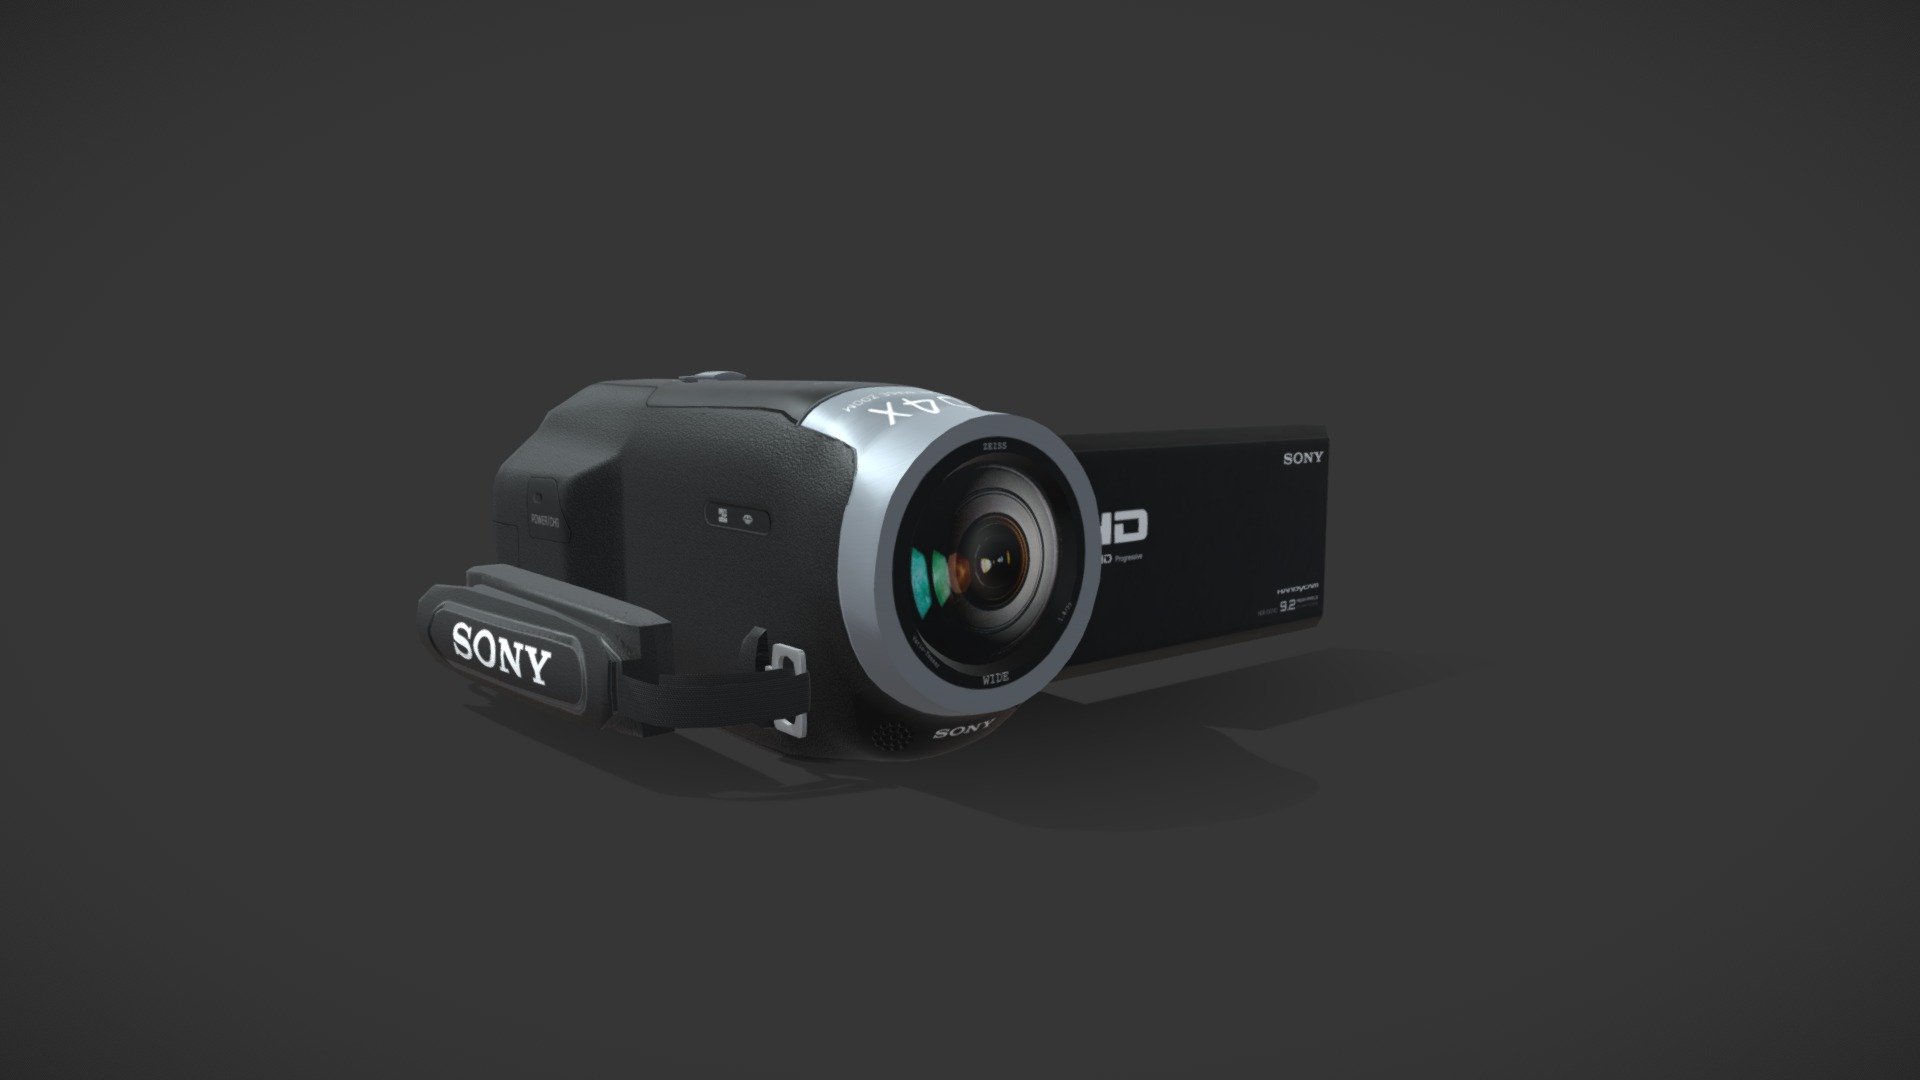 Sony CamCorder CX240
This model was done in maya 2018 and textured in substance painter 2.6.1
This model is done for a VR project.

Optimized for Games, Just a single texture page and Low poly 3d model